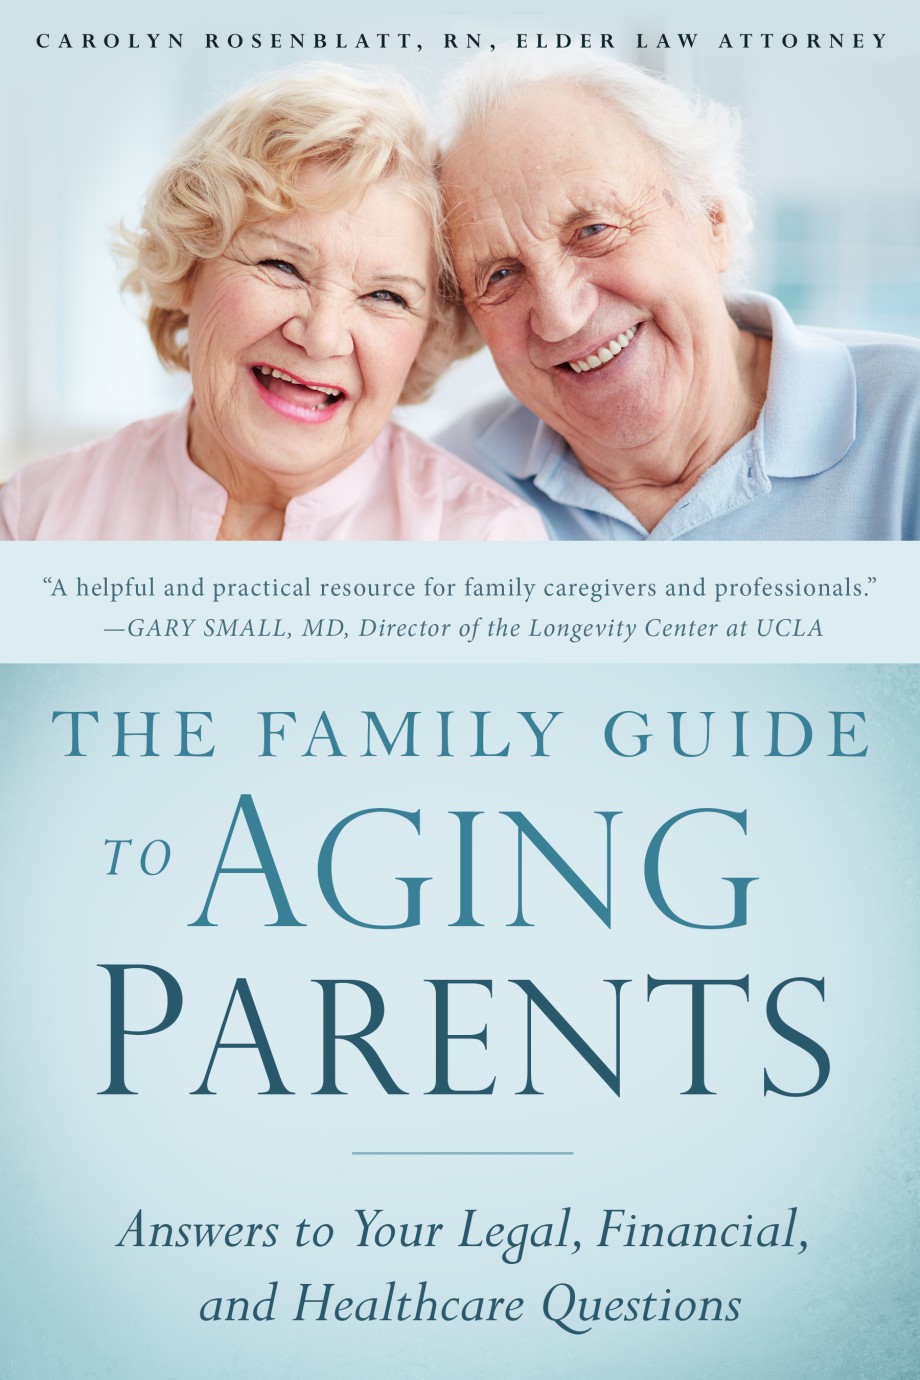 Family Guide to Aging Parents Answers to Your Legal, Financial, and Healthcare Questions